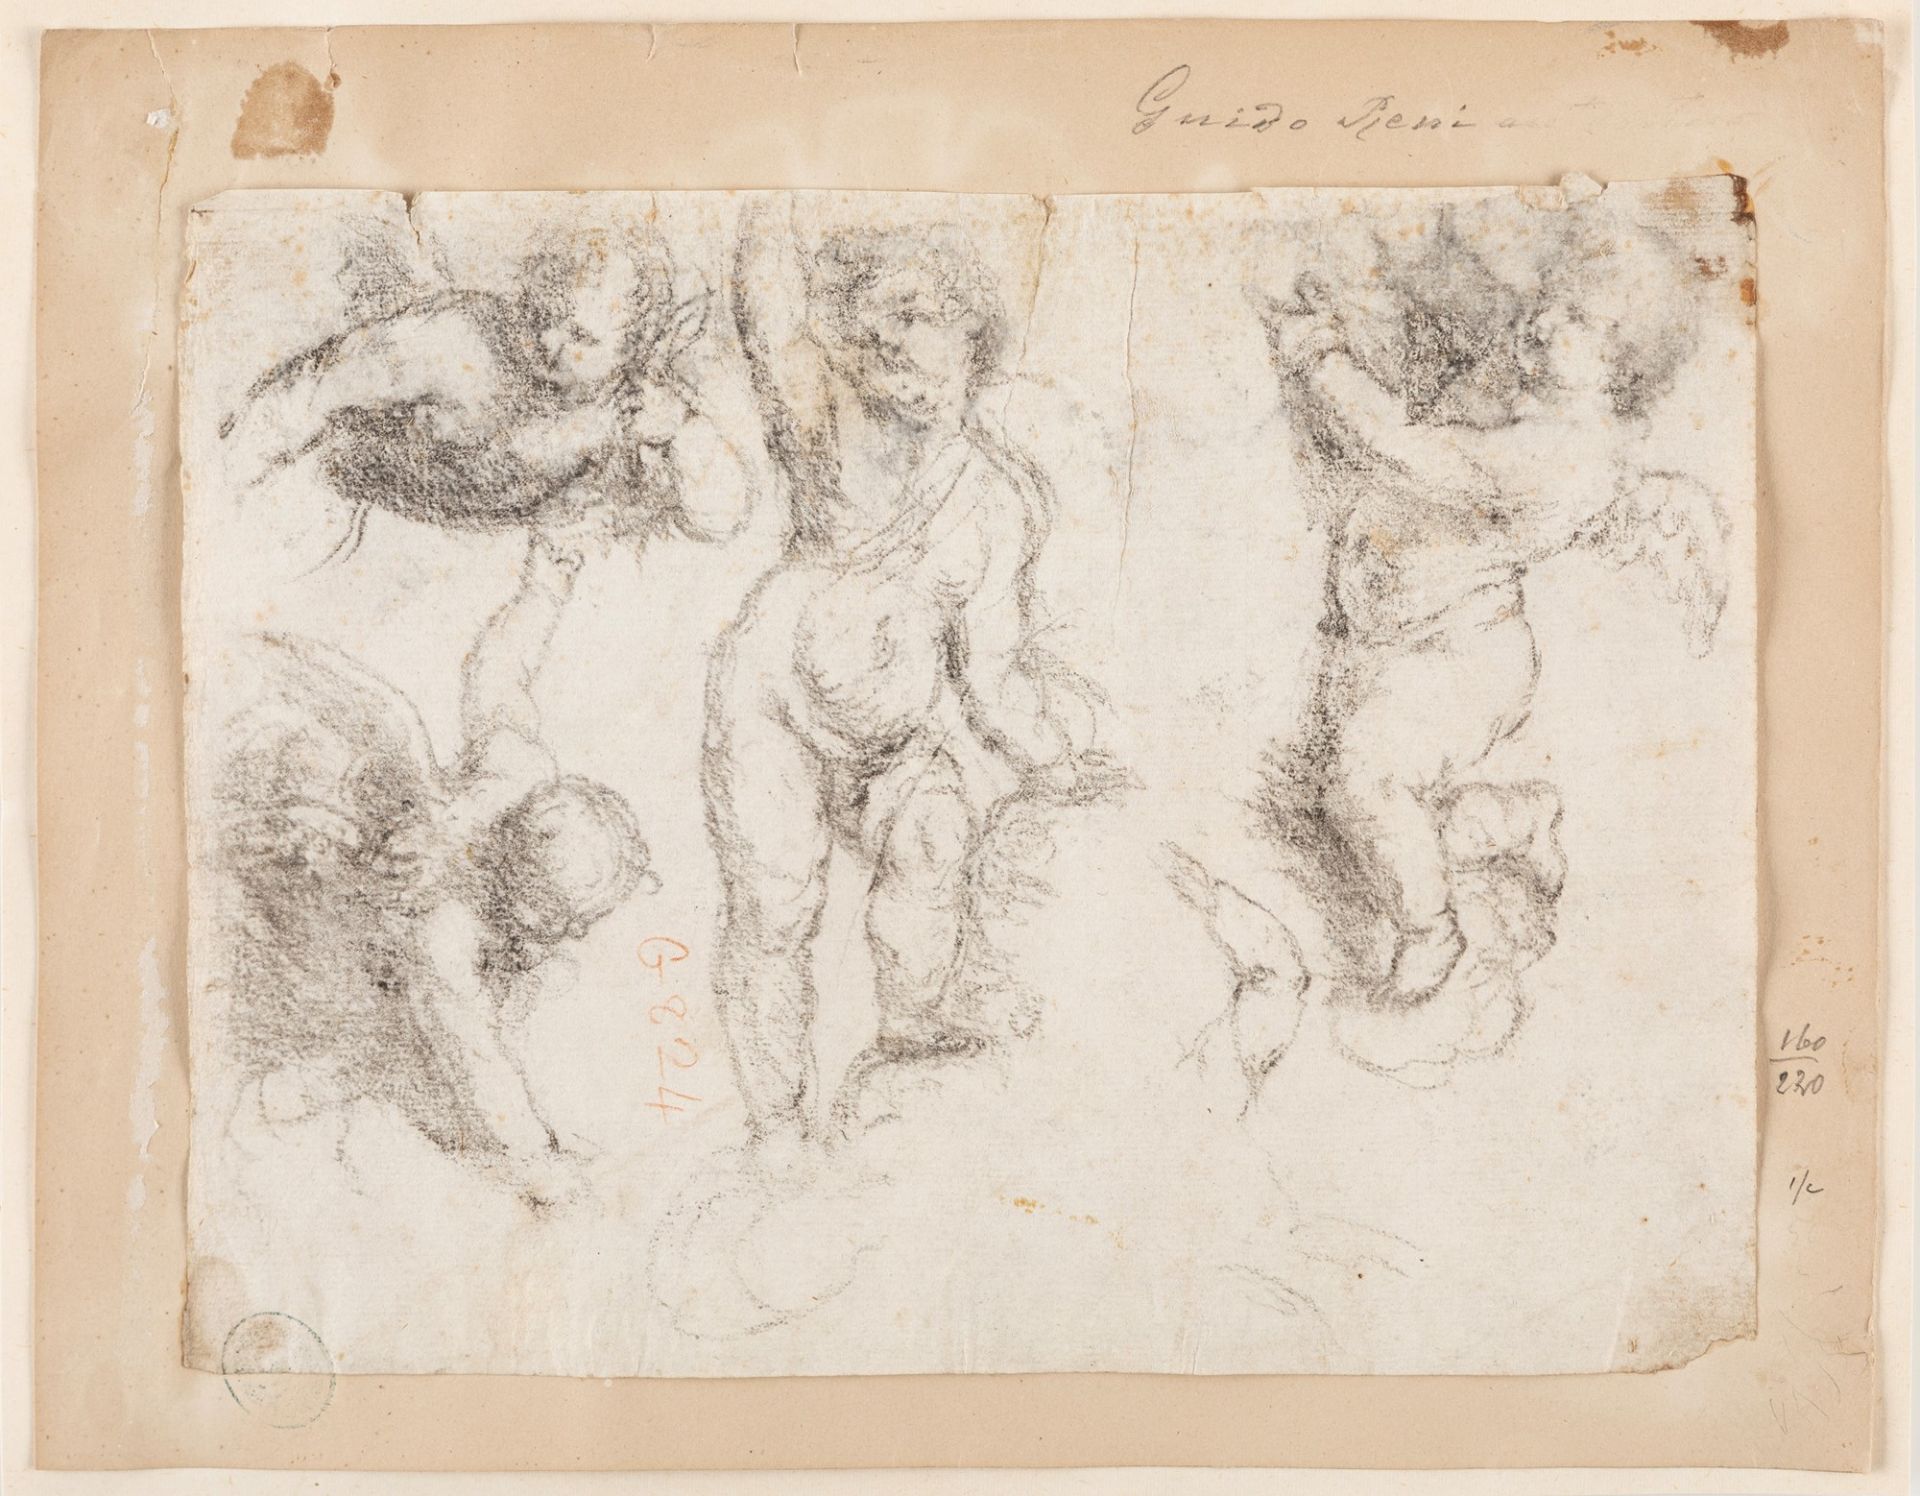 Lot consisting of three black chalk drawings of Emilian school, 17th - 18th centuries - Image 3 of 4